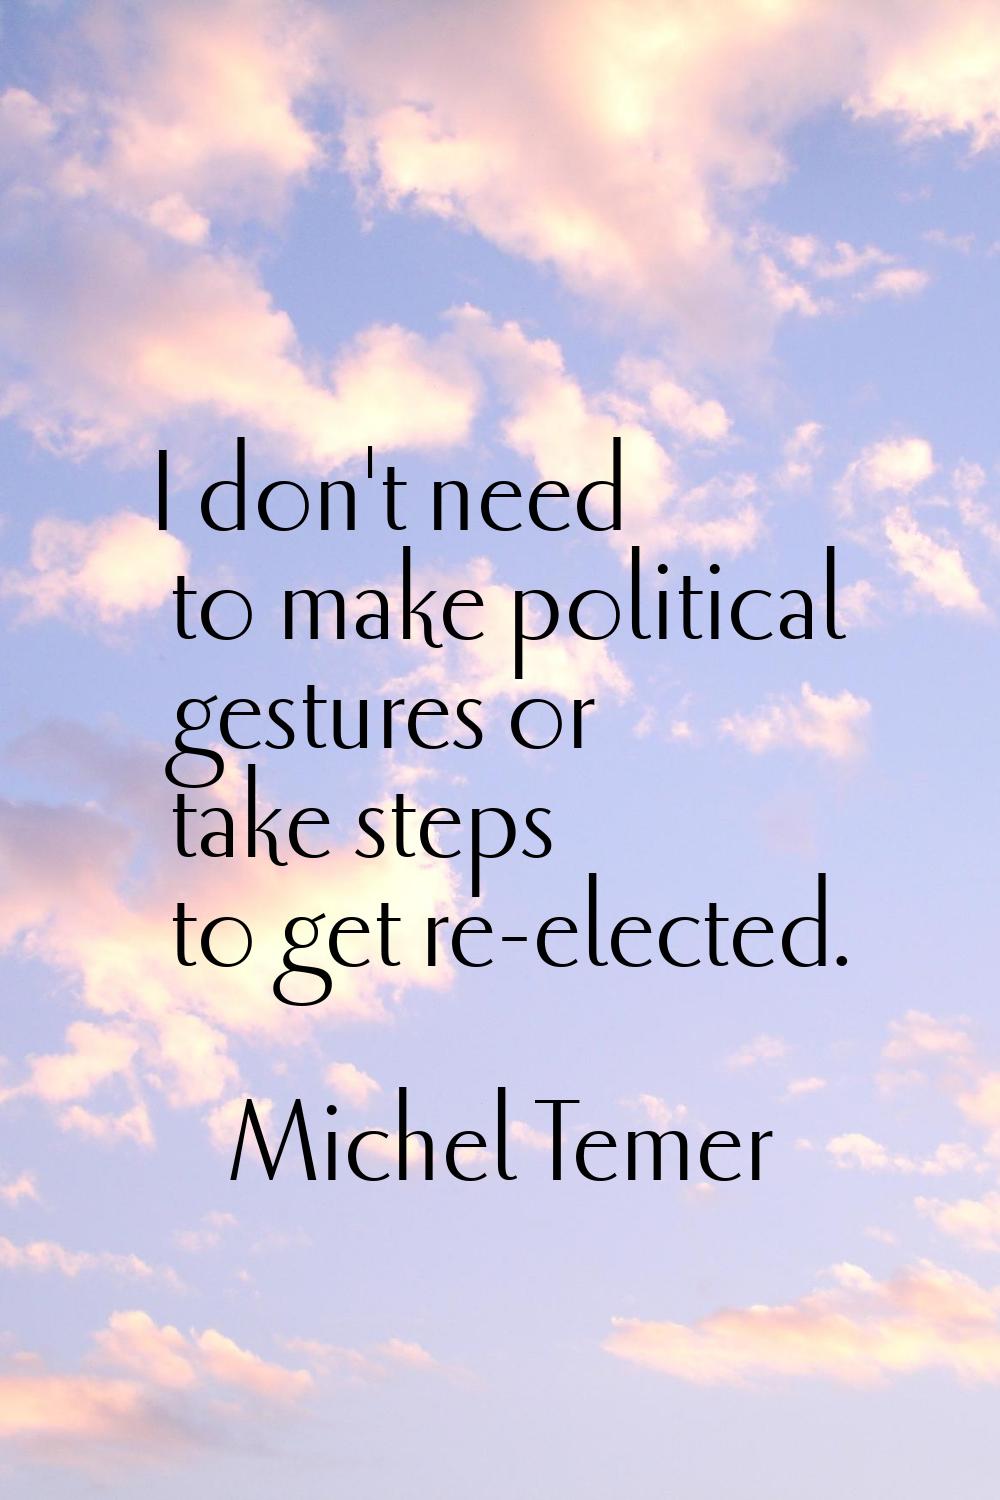 I don't need to make political gestures or take steps to get re-elected.